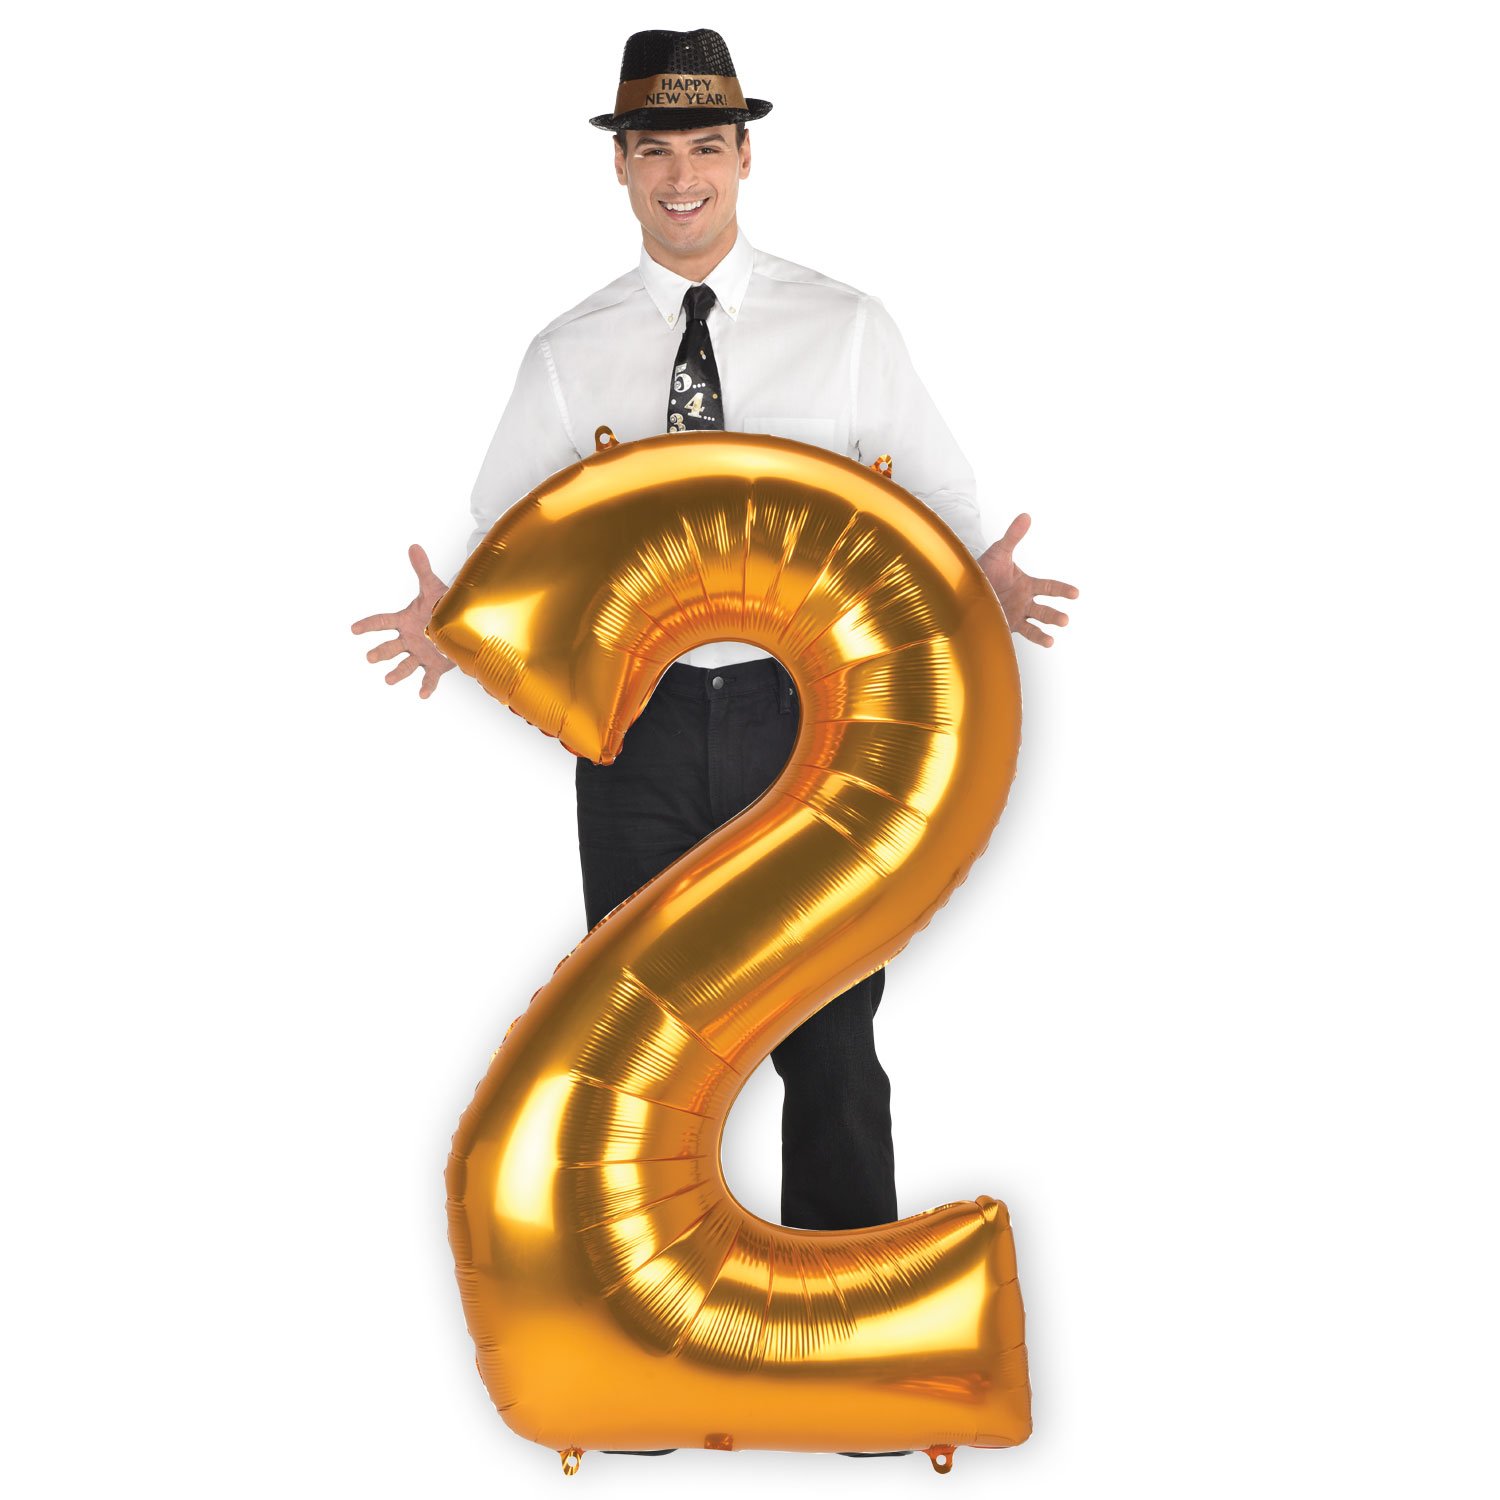 JUMBO 53-Inch Gold Foil Number 2 Balloon (Deflated) 